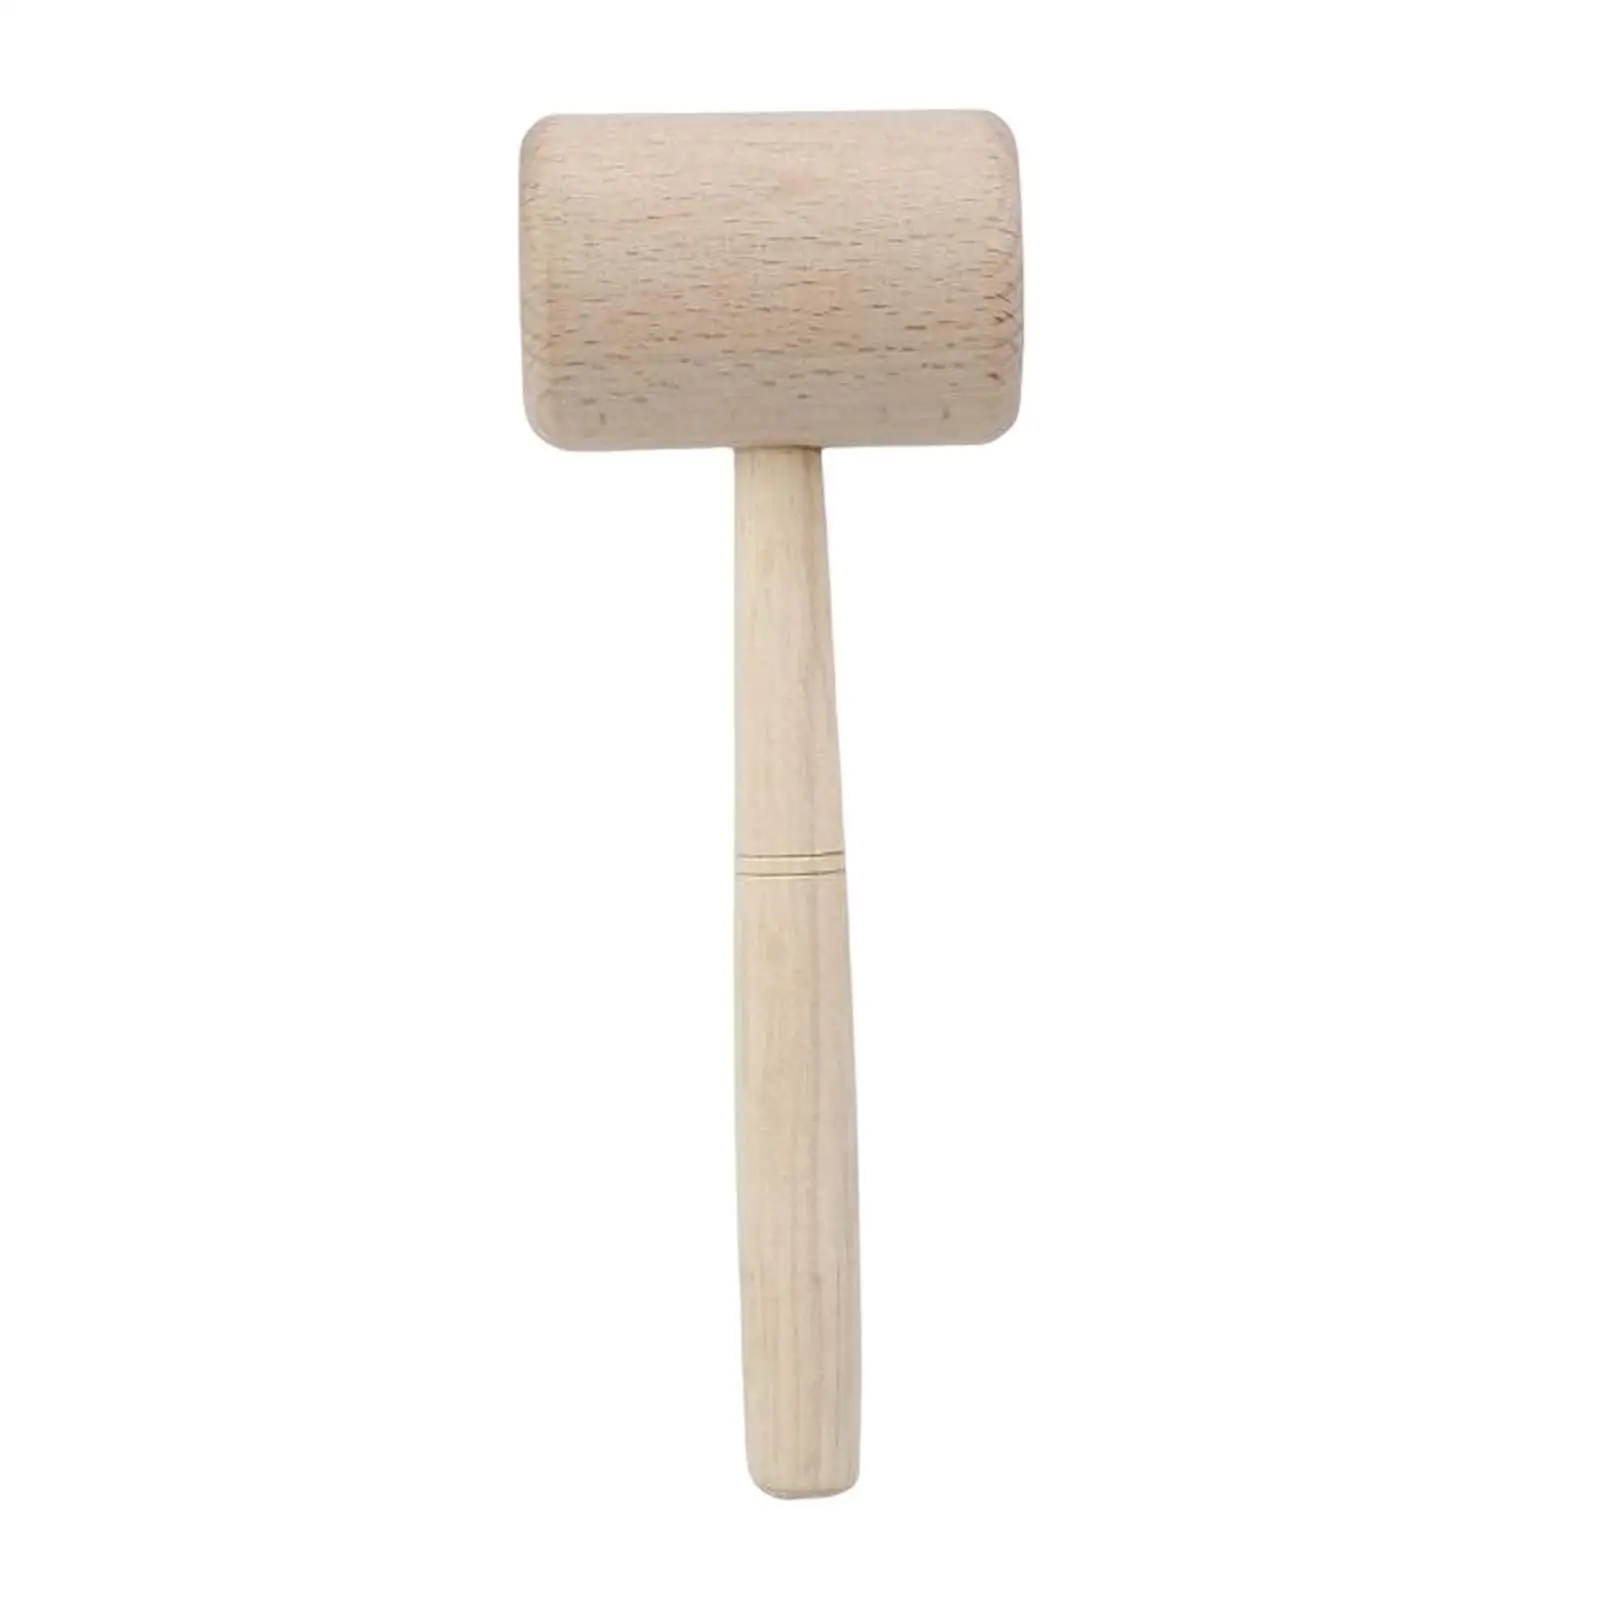 225mm Wood Mini Woodworking Durable Wood Made From Beech Wood for Leather